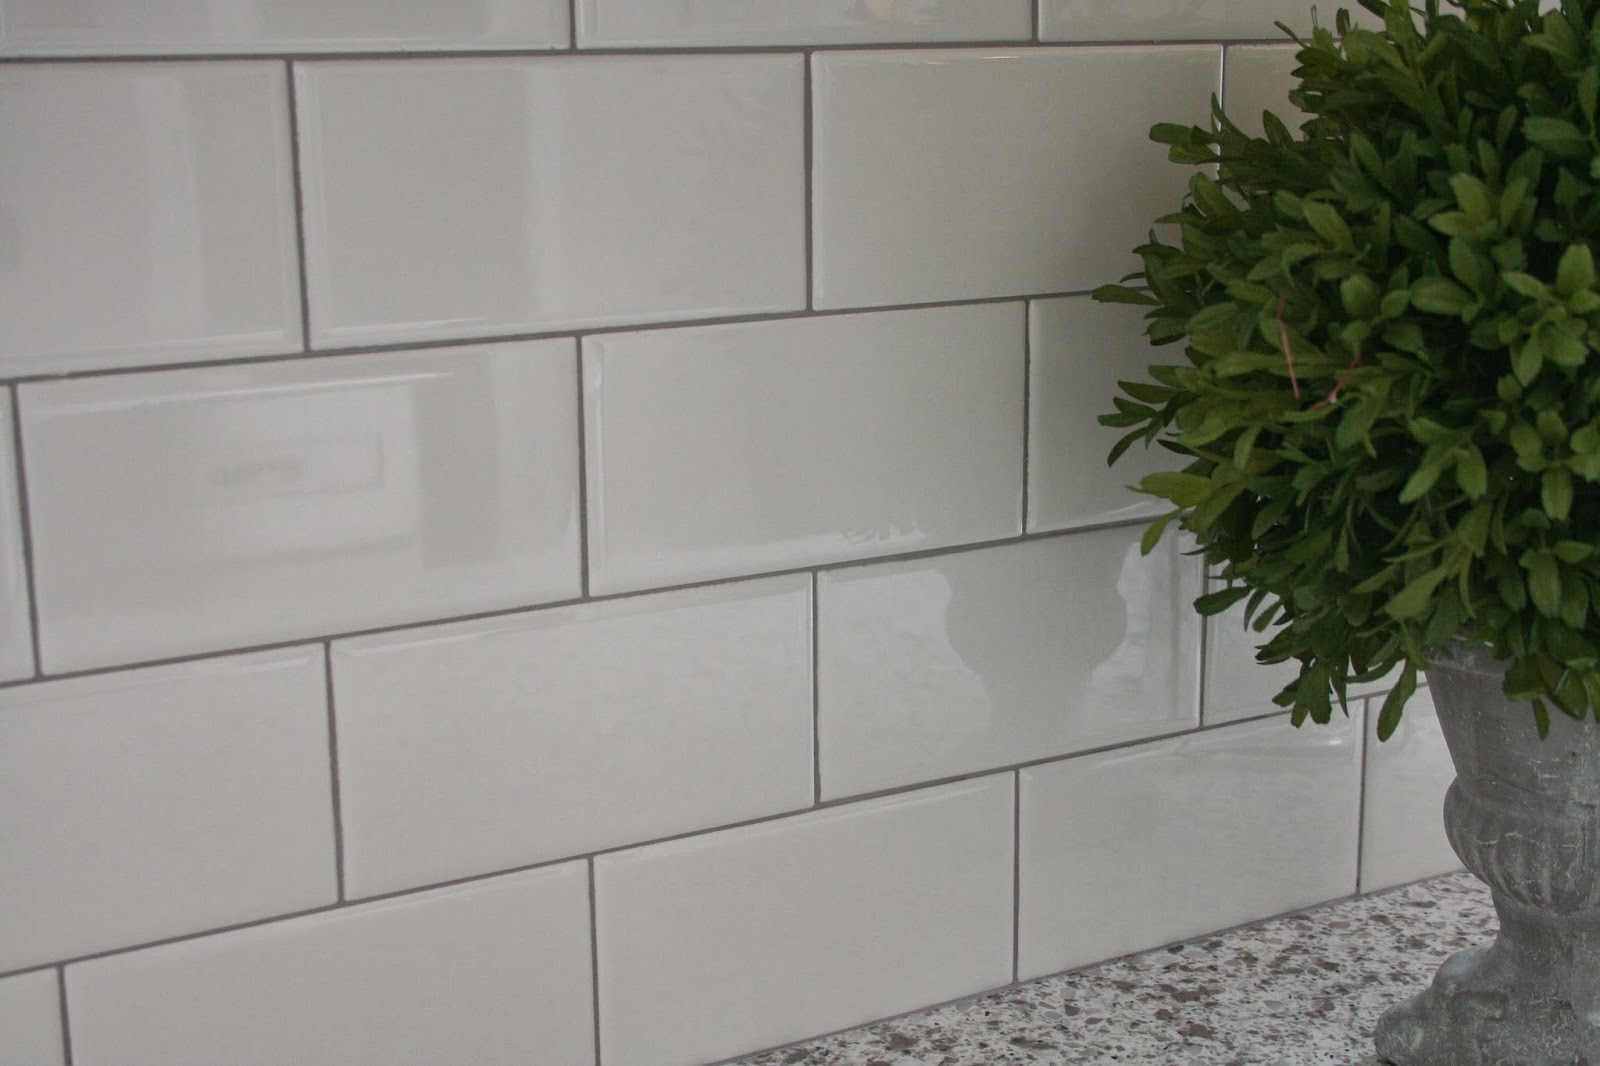 Delorean Gray grout with white subway tile | White subway tile kitchen, White subway tile, White ...